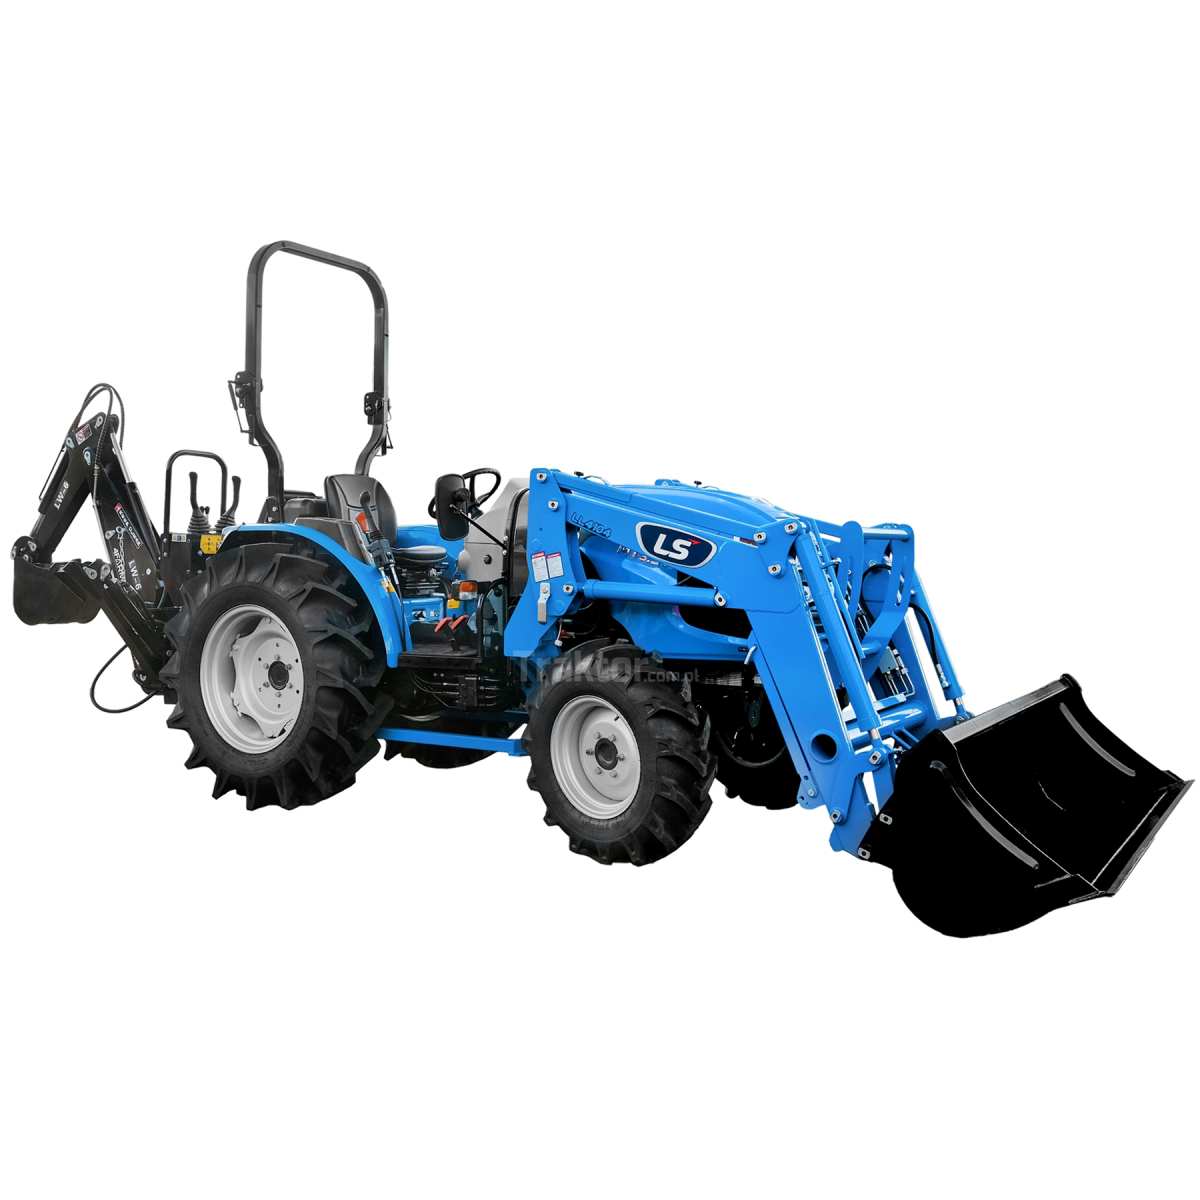 LS Tractor MT3.50 HST 4x4 - 47 HP + TUR LS LL4104 front loader + excavator for LW-6 4FARMER tractor